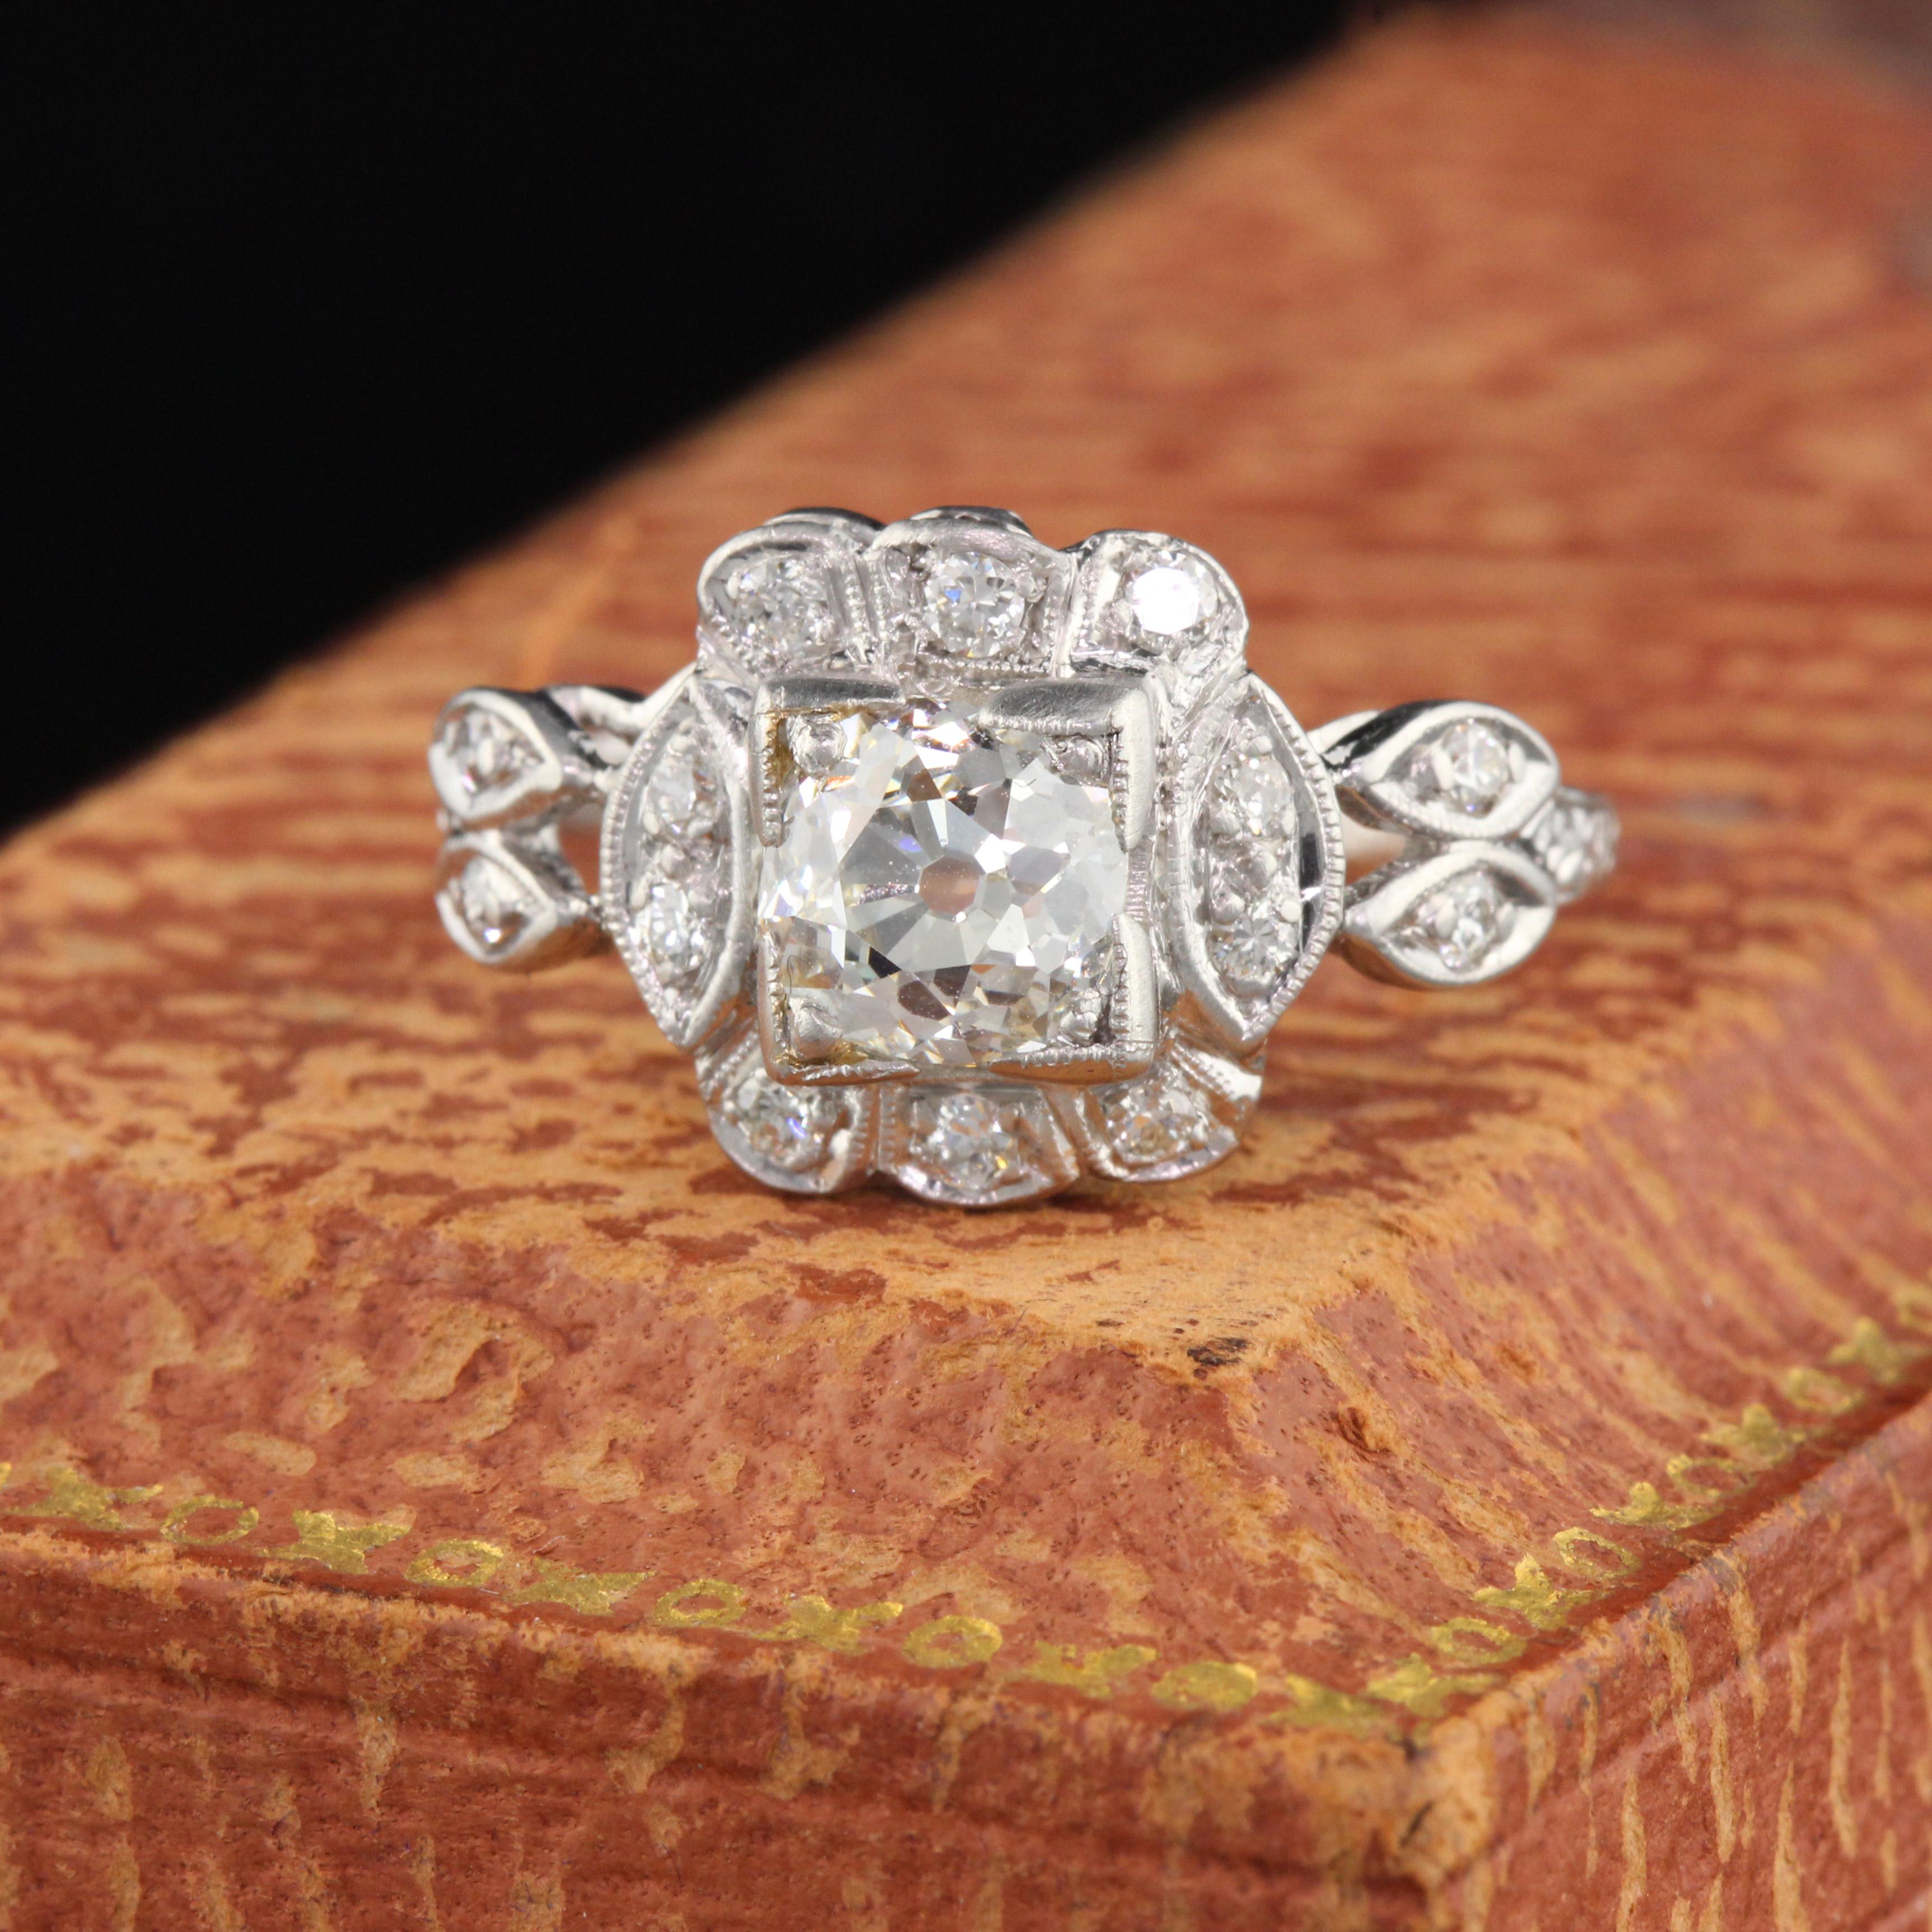 Beautiful Art Deco engagement ring with a 1.11 ct GIA certified Old Mine Brilliant Cut center diamond and a floral design. 

Item #R0021

Metal: Platinum

Weight: 4.1 Grams

Total Diamond Weight: Approximately 1.30 ctw

Center Diamond Weight: GIA